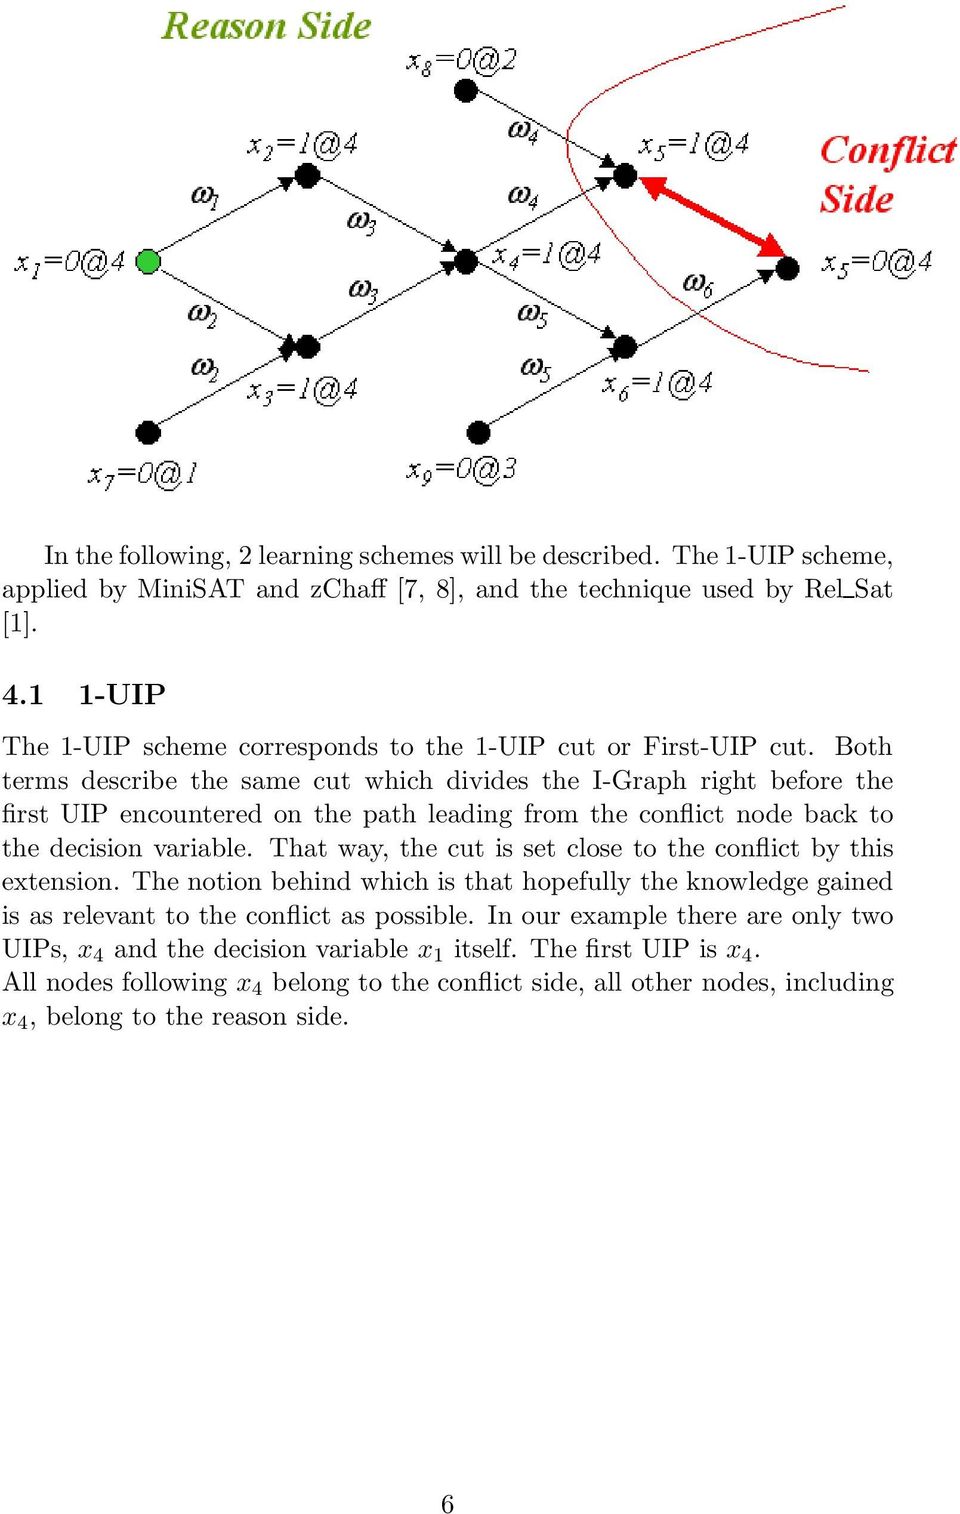 Both terms describe the same cut which divides the I-Graph right before the first UIP encountered on the path leading from the conflict node back to the decision variable.